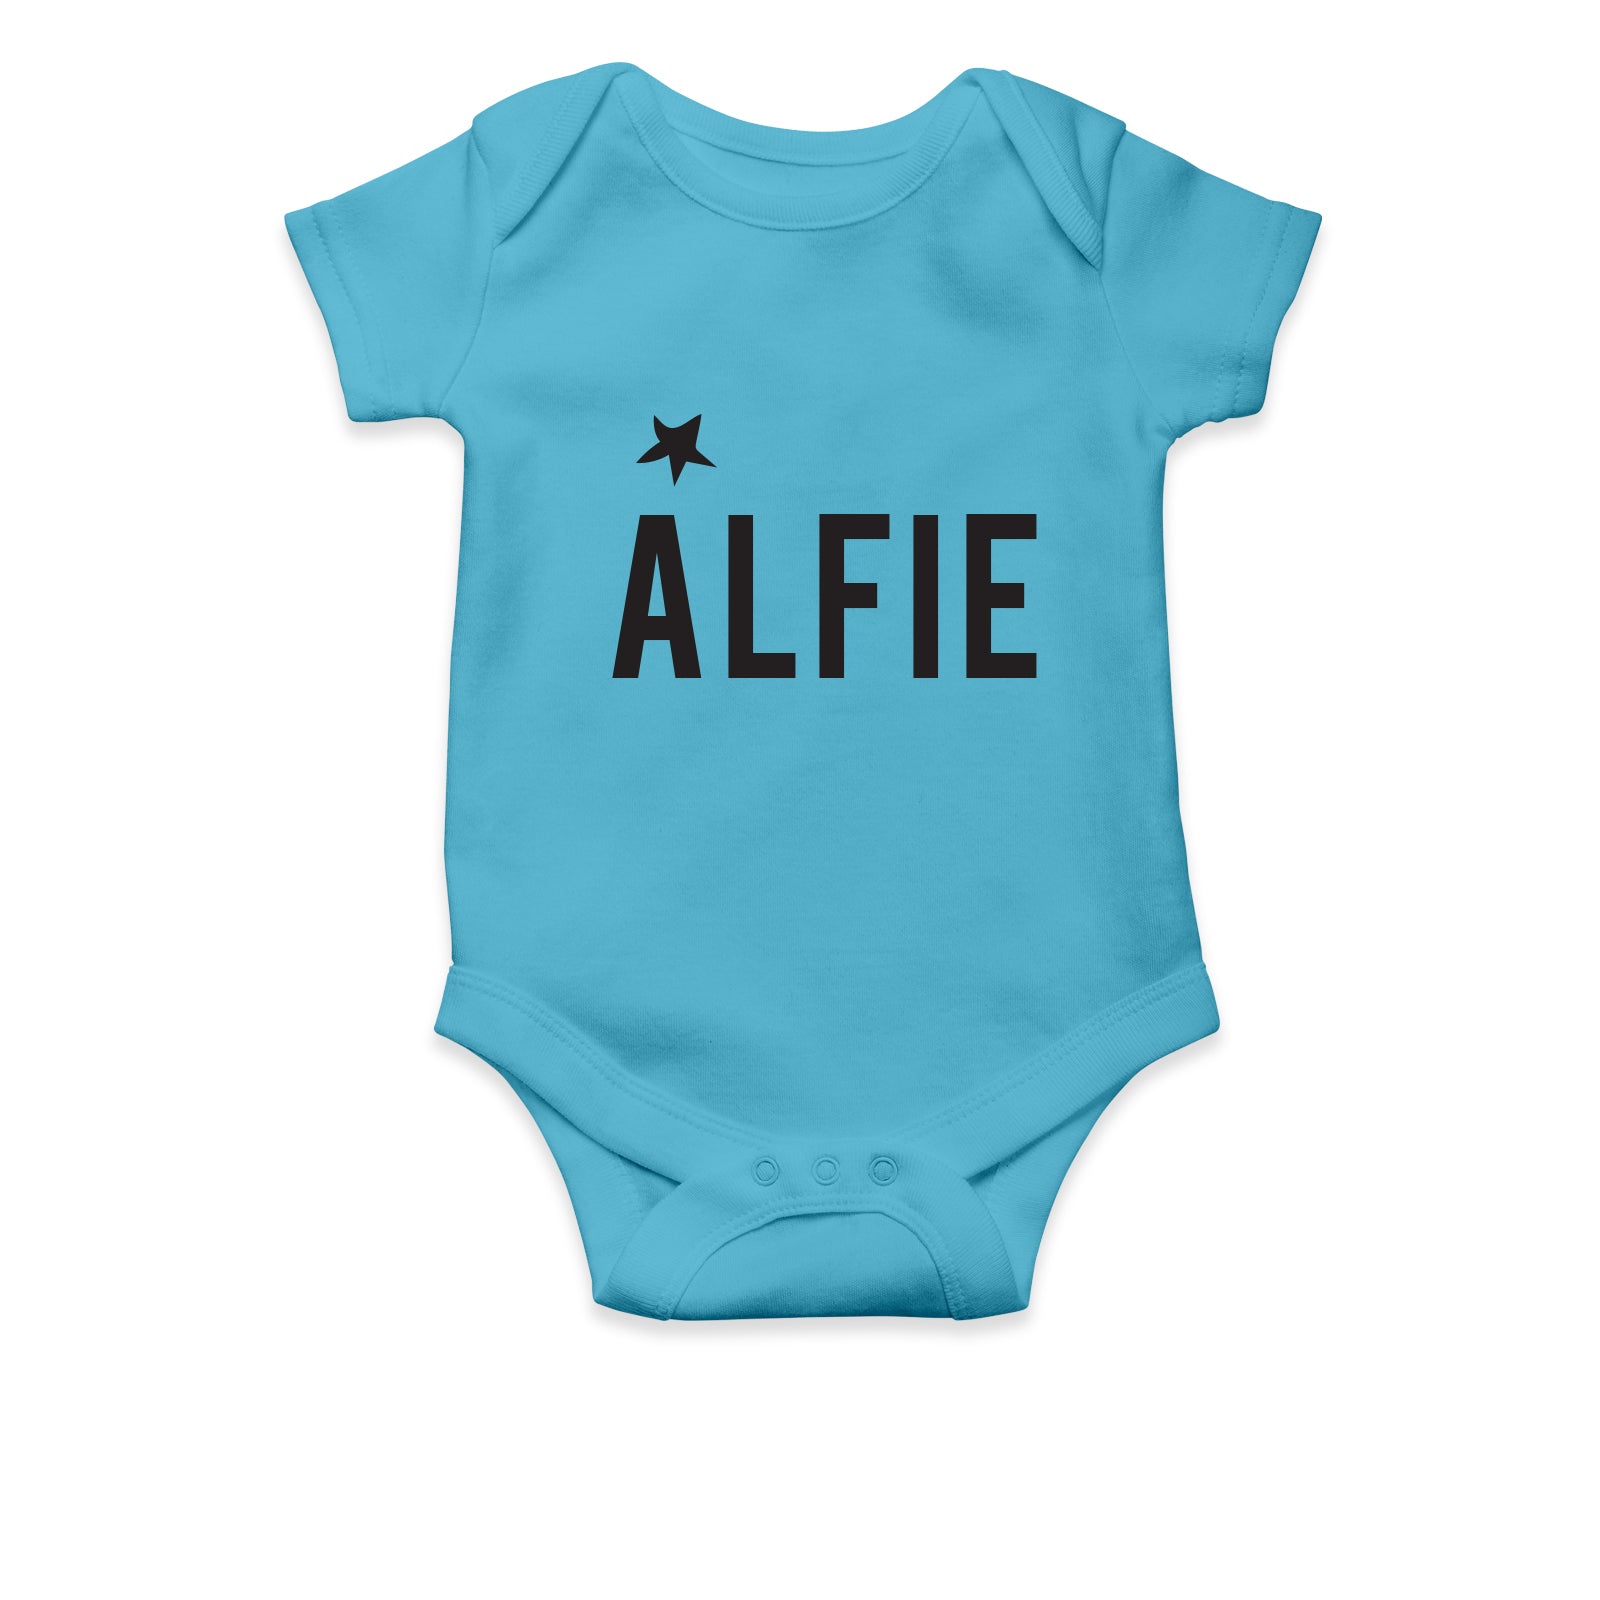 Personalised White Baby Body Suit Grow Vest - A Star